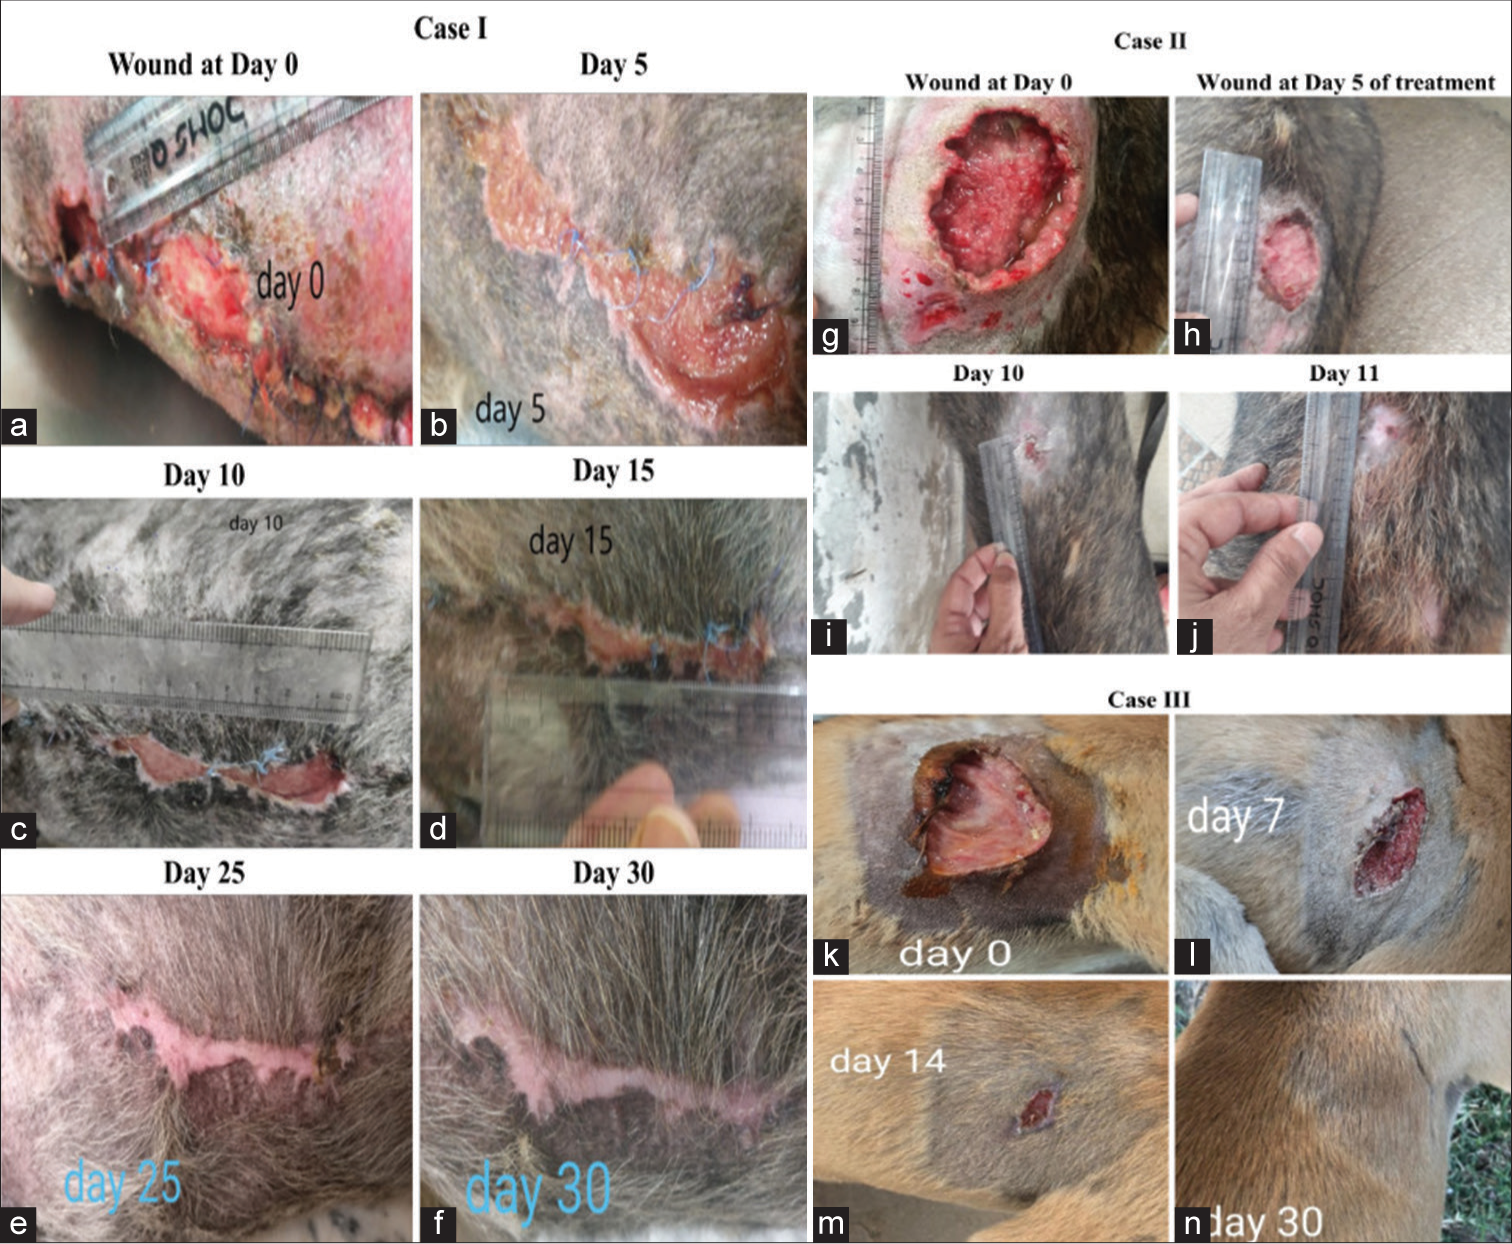 Efficacy of topical application of VG111 on the open wounds of German shepherds (a-f) Case I, (g-j) Case II and one other indistinct dog breed (k-n) Case III. The closure of the wound orifices on 30th, 11th, and 30th day, respectively.